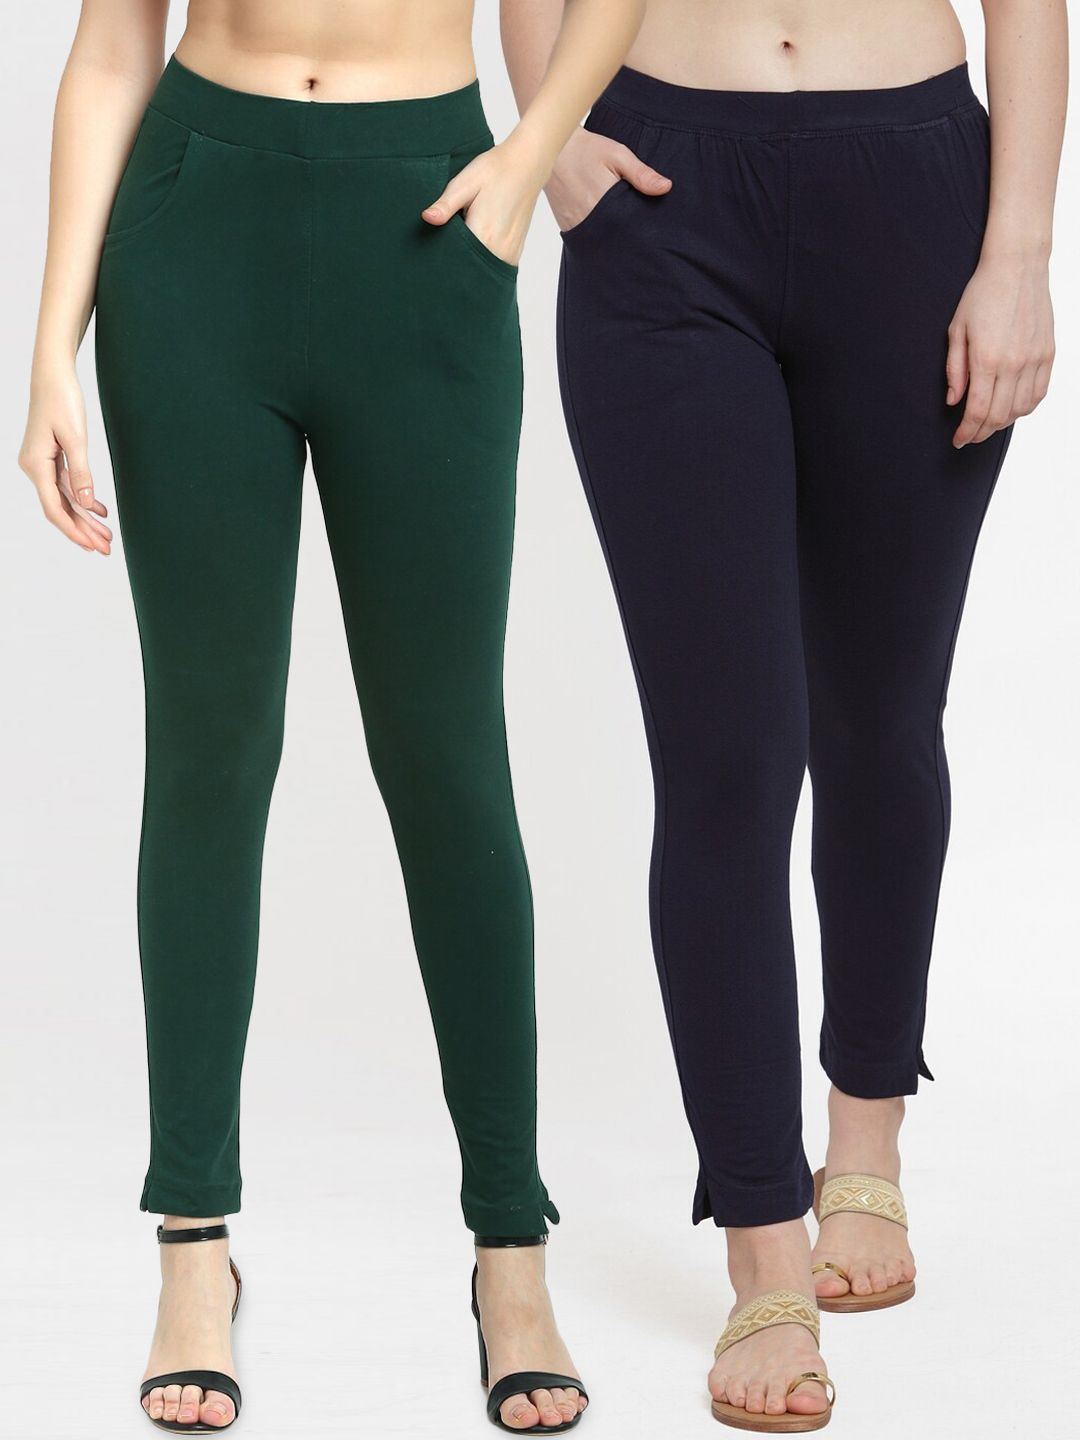 TAG 7 Women Set of 2 Green & Navy Blue Solid Ankle-Length Leggings Price in India